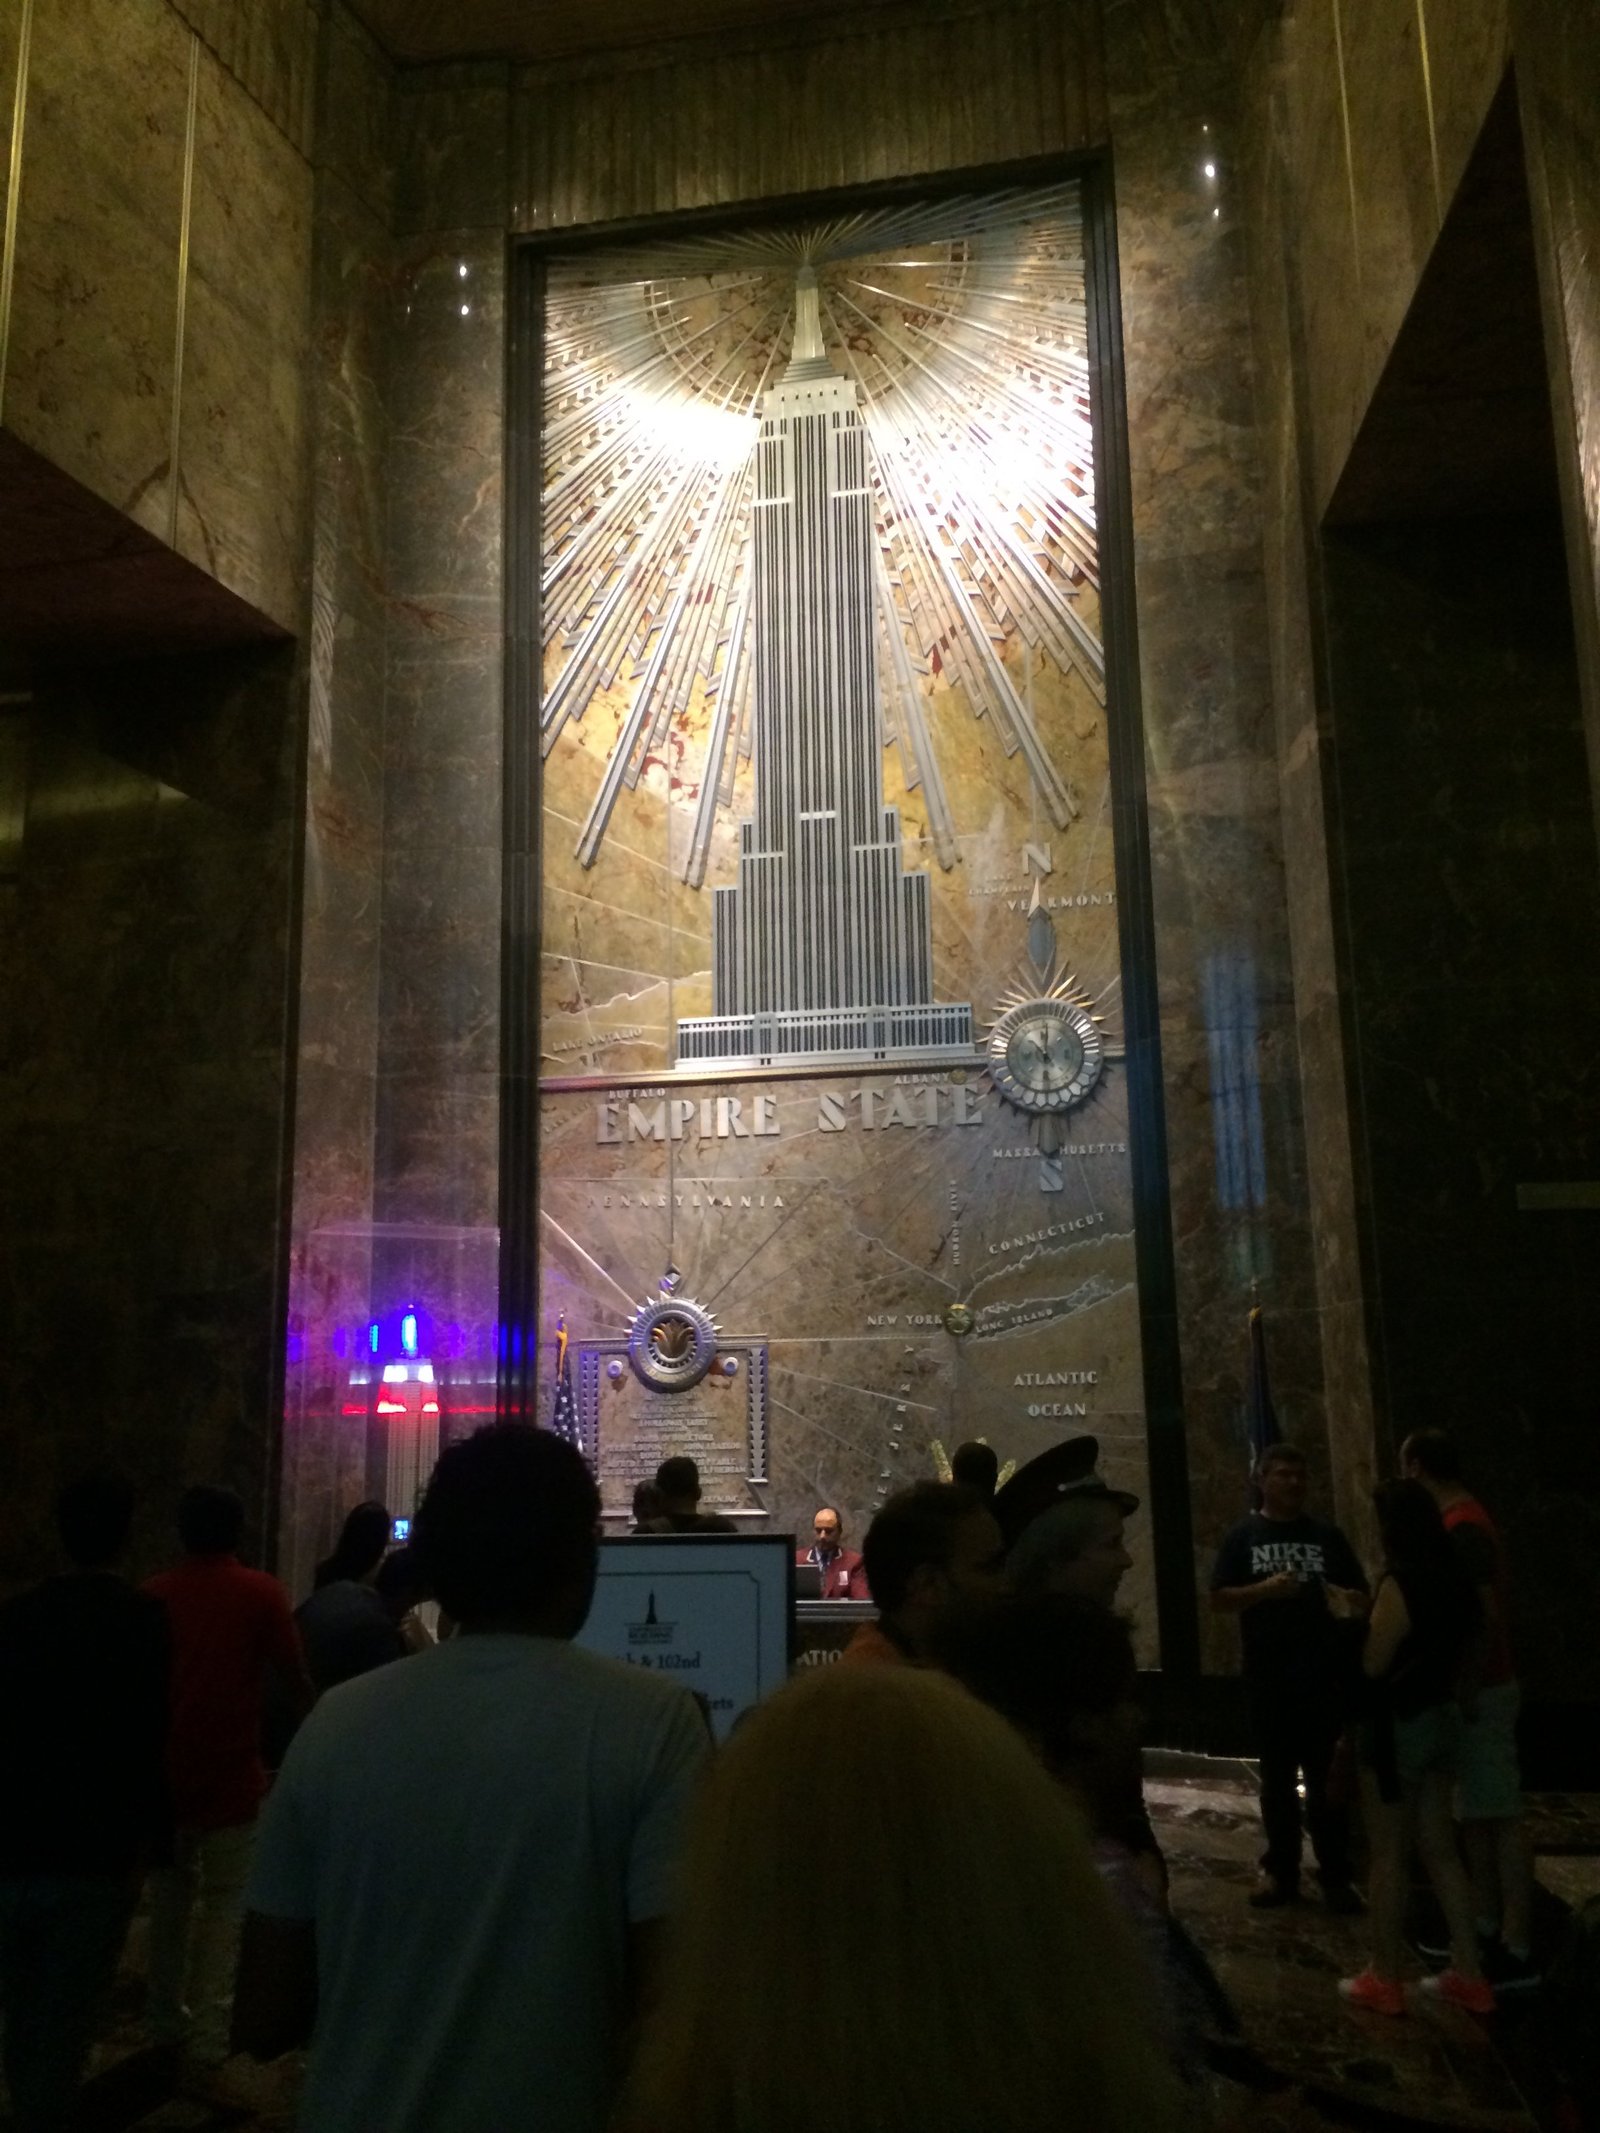 The glorious art-deco ESB lobby. Hmm... reminds me a bit of Hell Cab (the game), doesn't it?